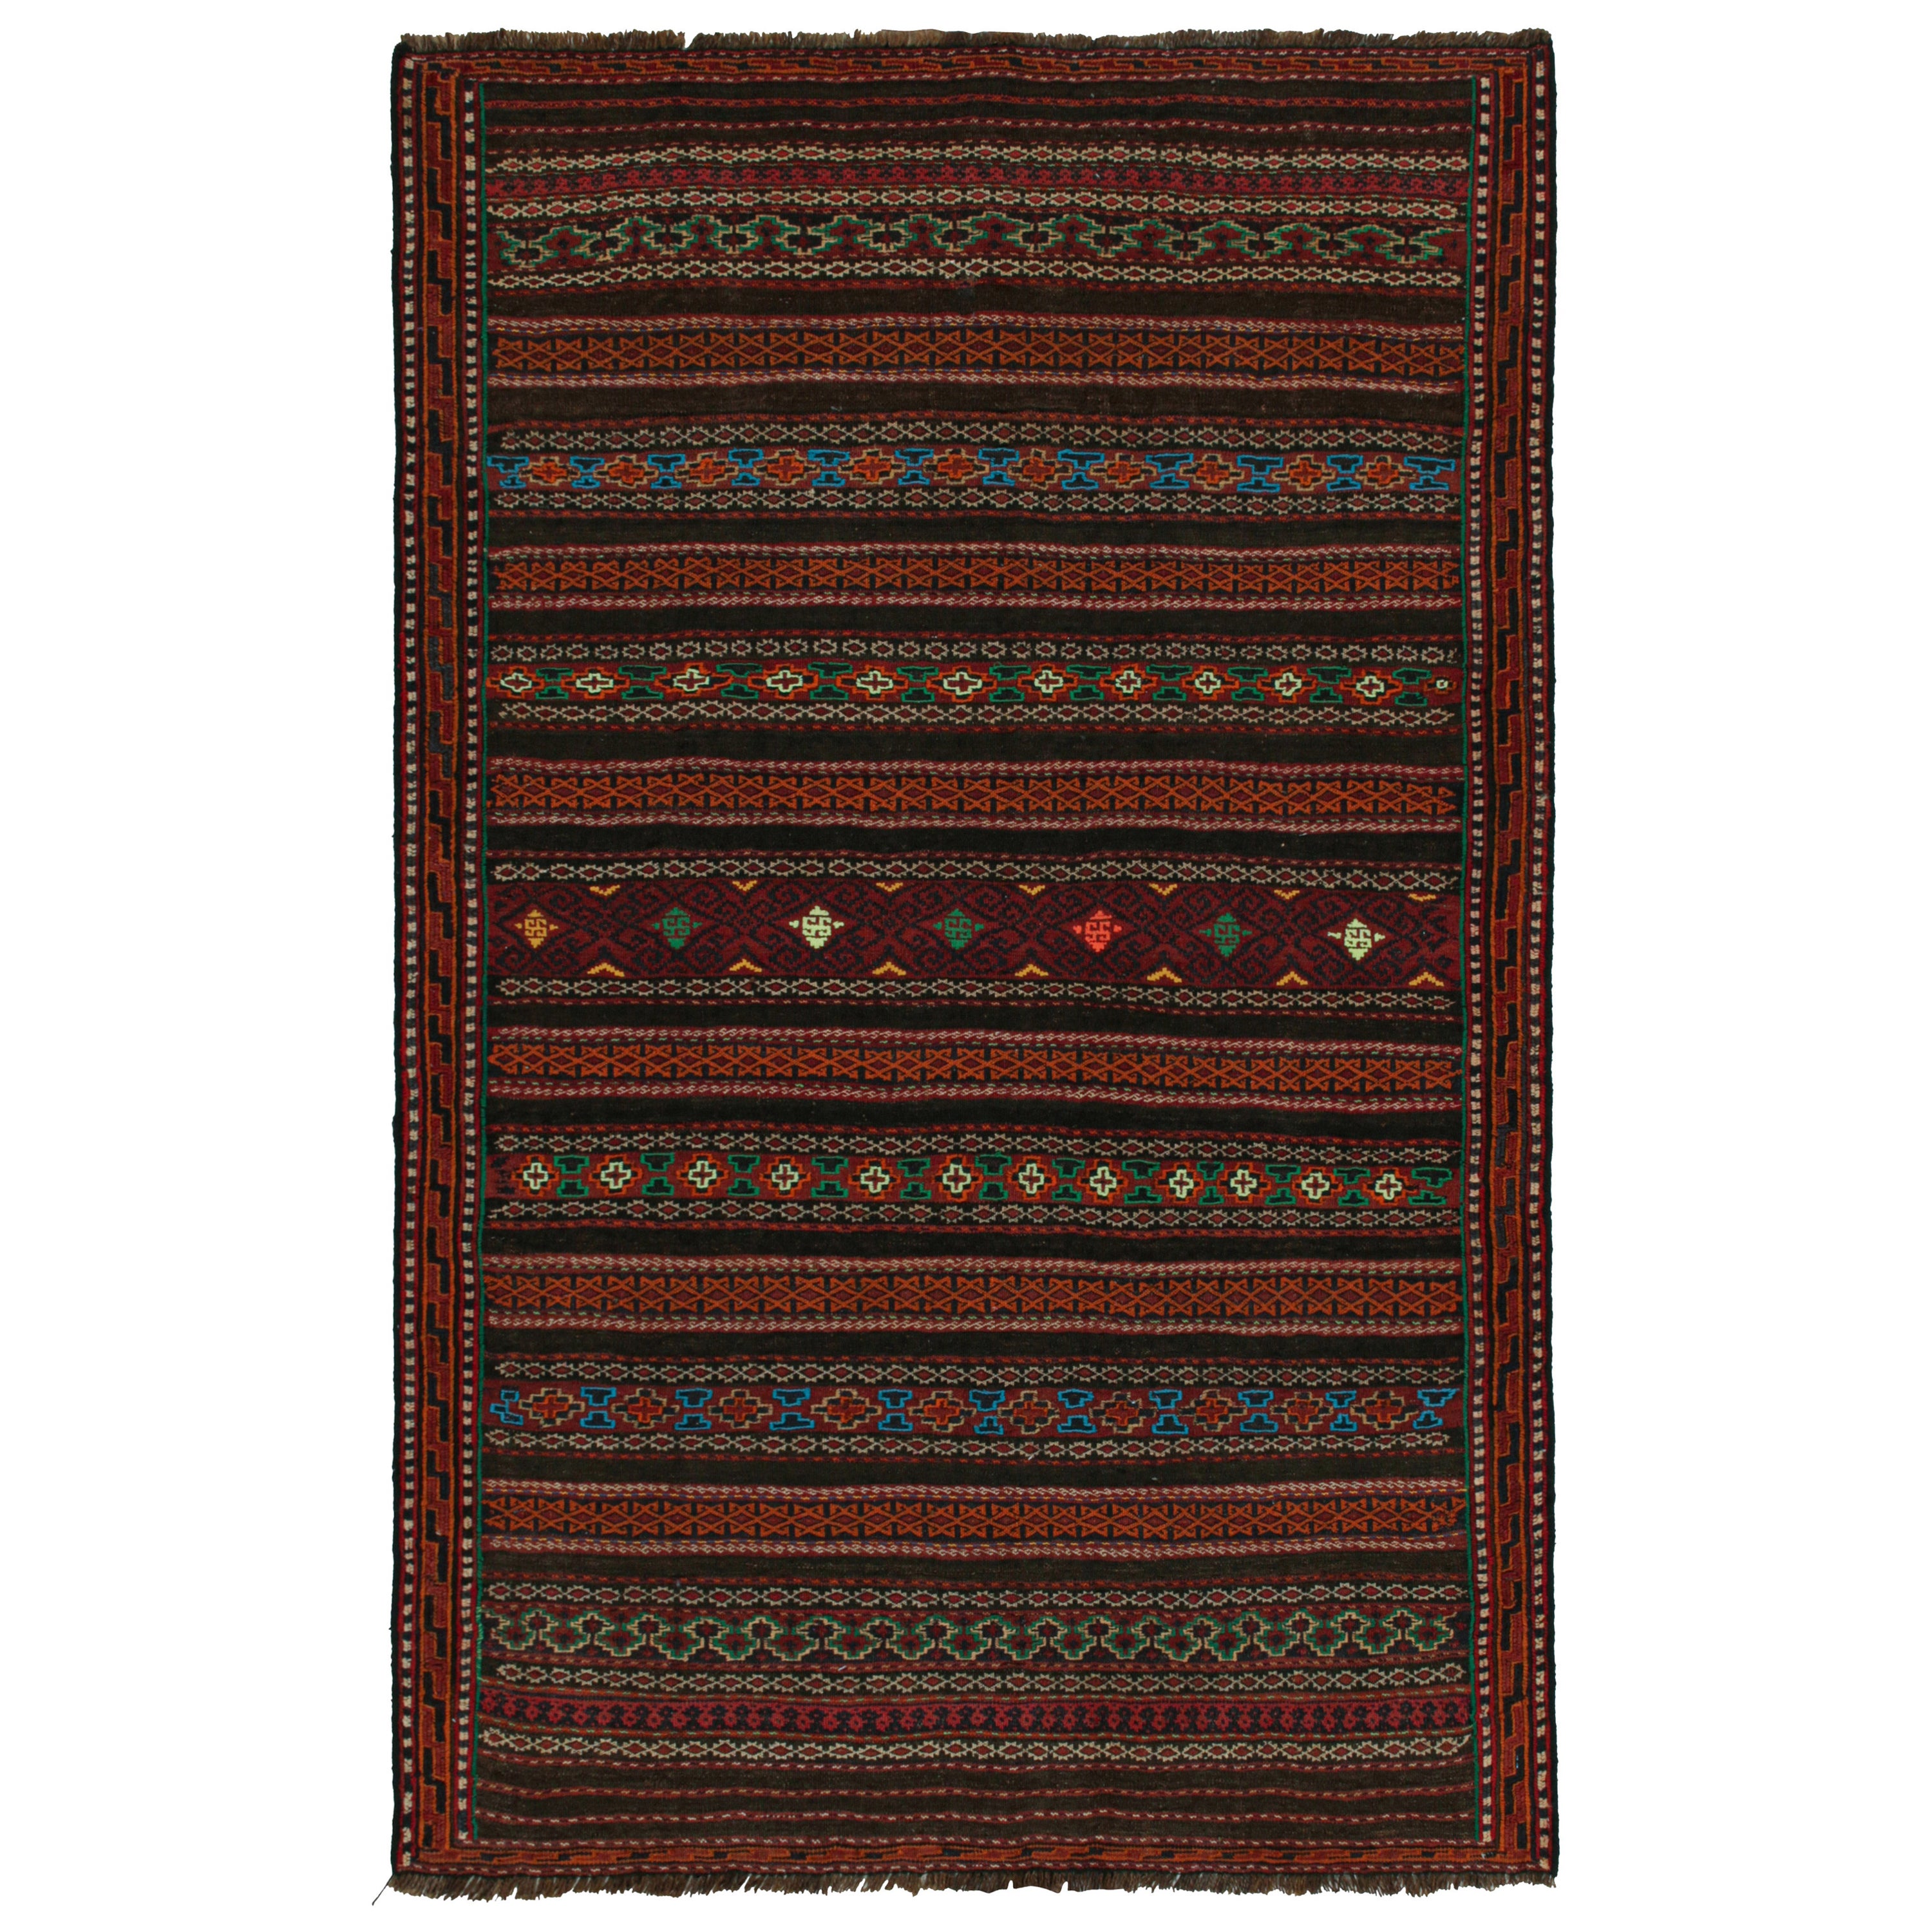 Vintage Baluch Tribal Kilim in Brown with Geometric Patterns, from Rug & Kilim For Sale